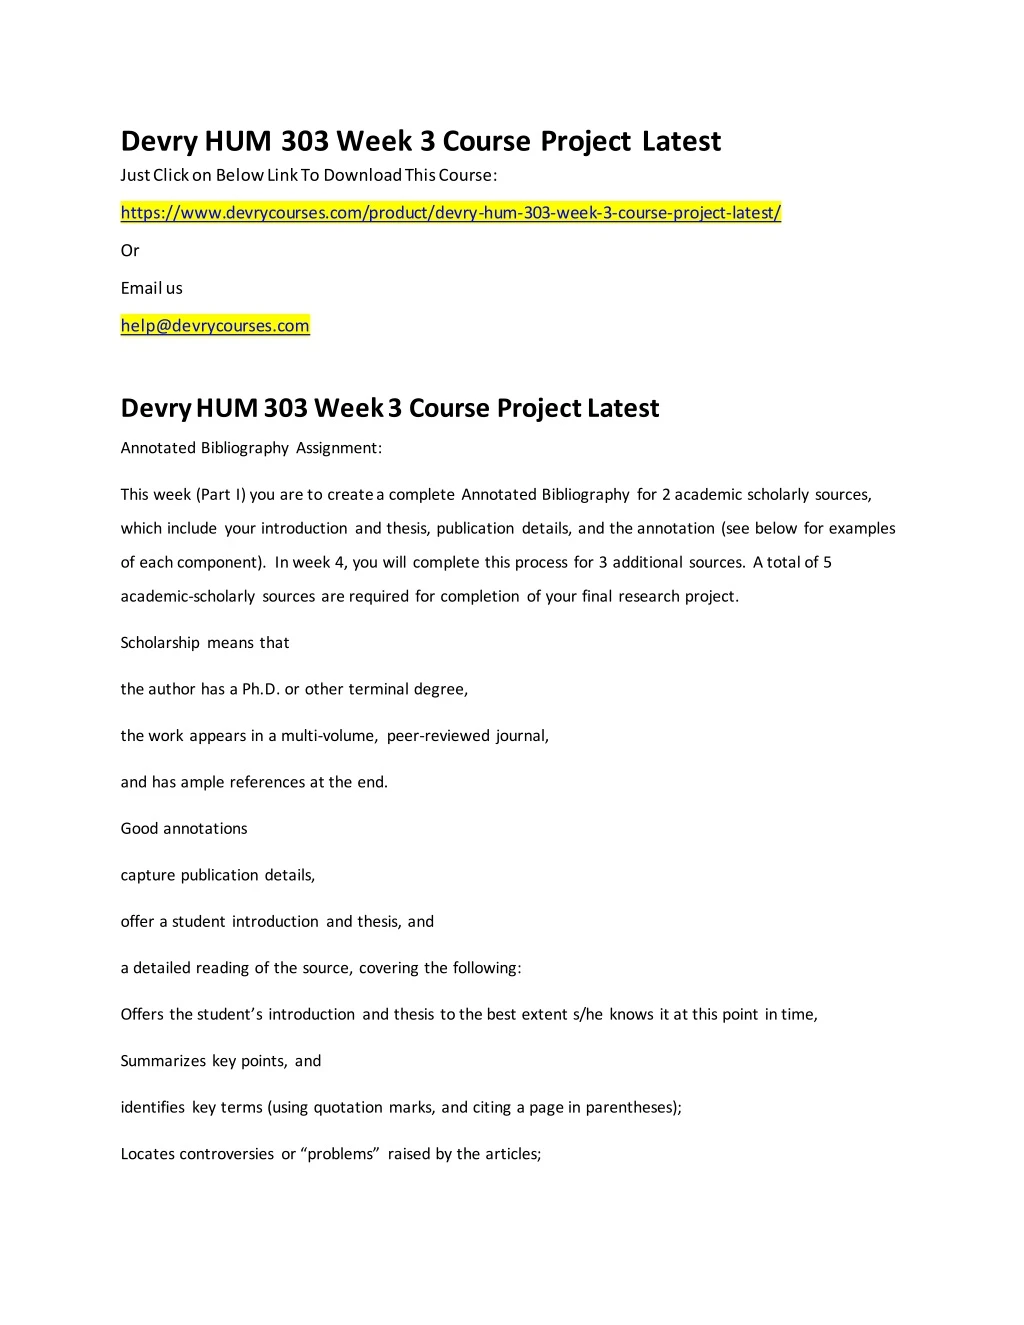 devry hum 303 week 3 course project latest just